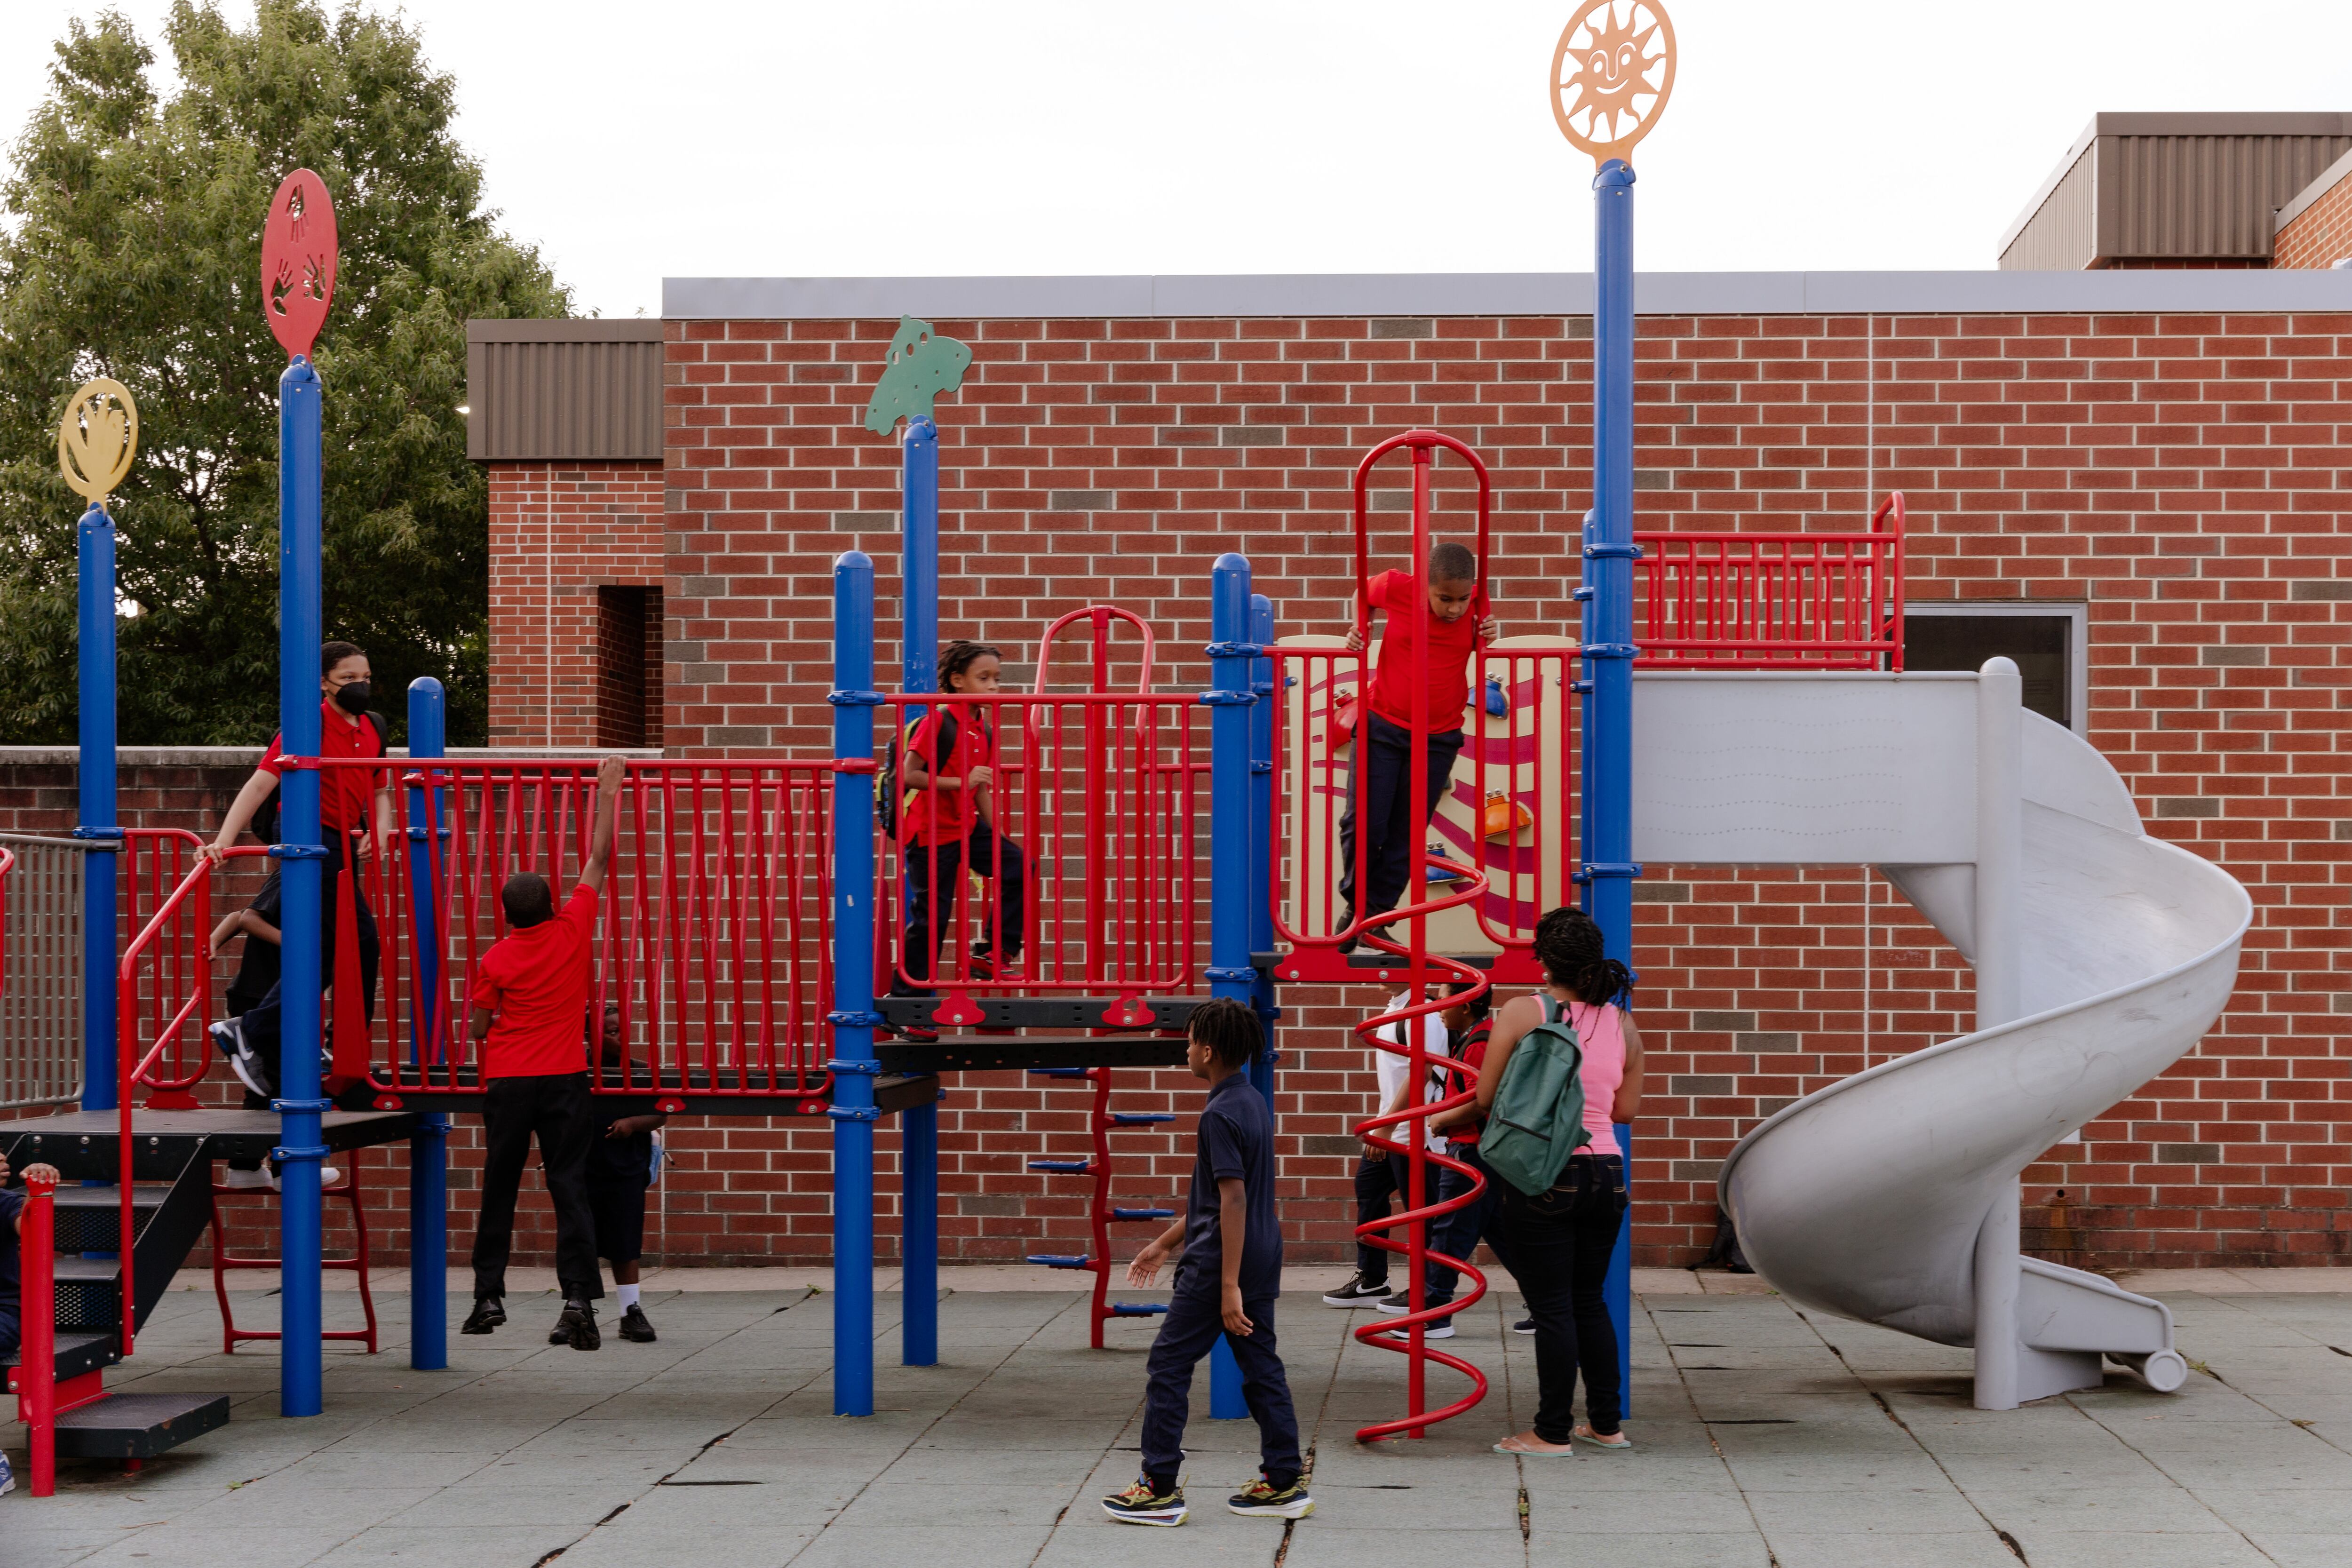 young students play on a red playground set with a school brick building in the background.